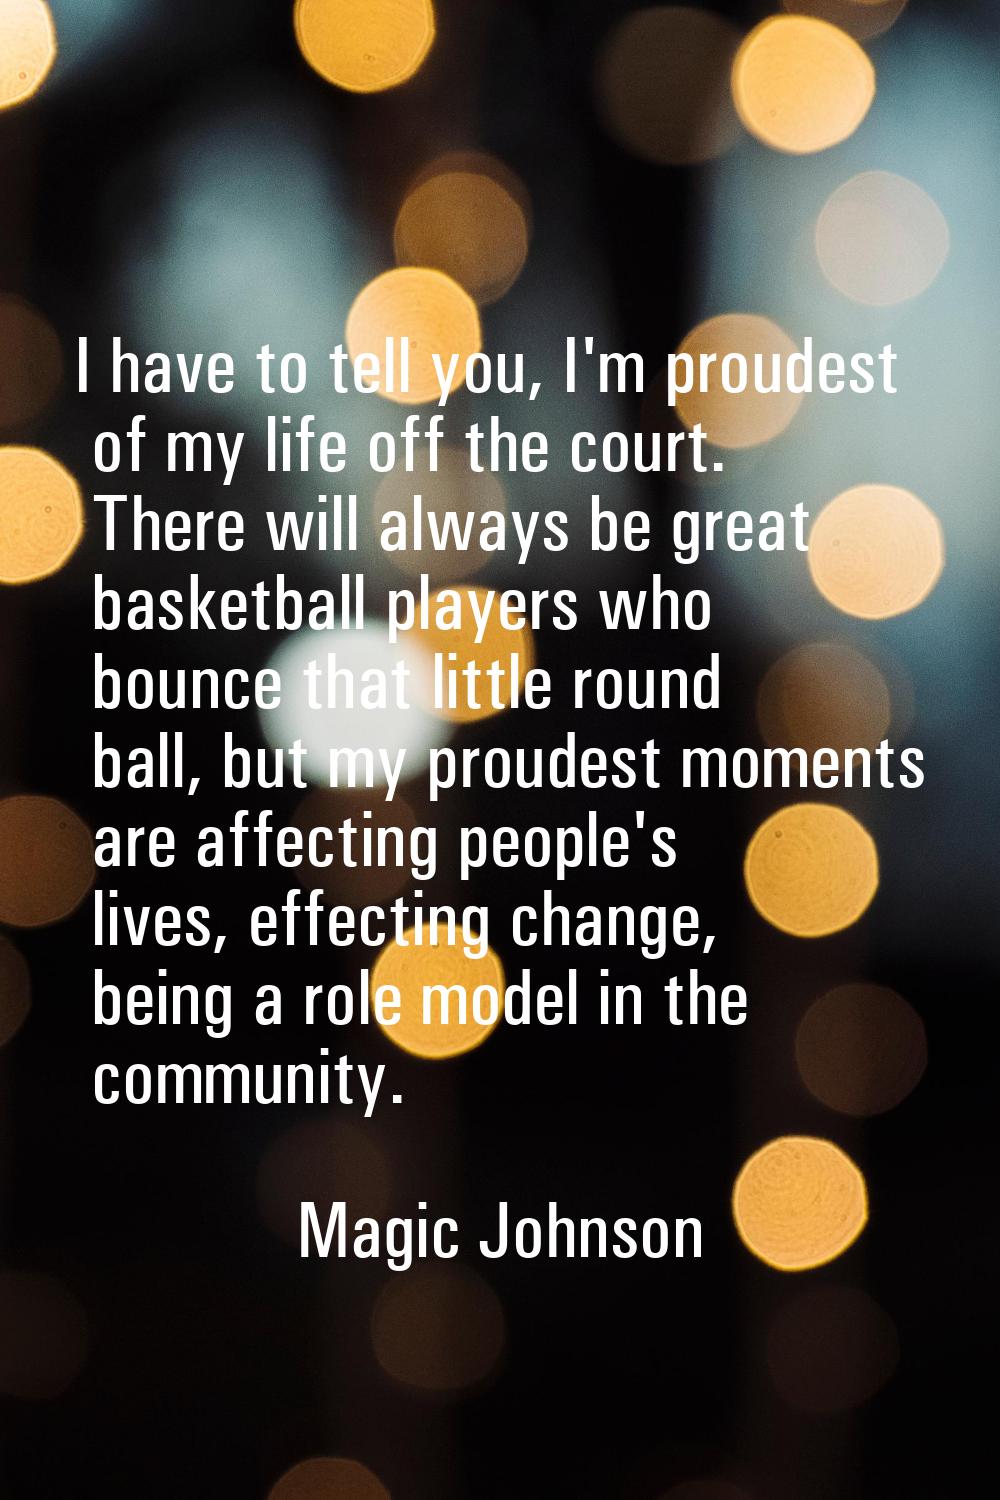 I have to tell you, I'm proudest of my life off the court. There will always be great basketball pl